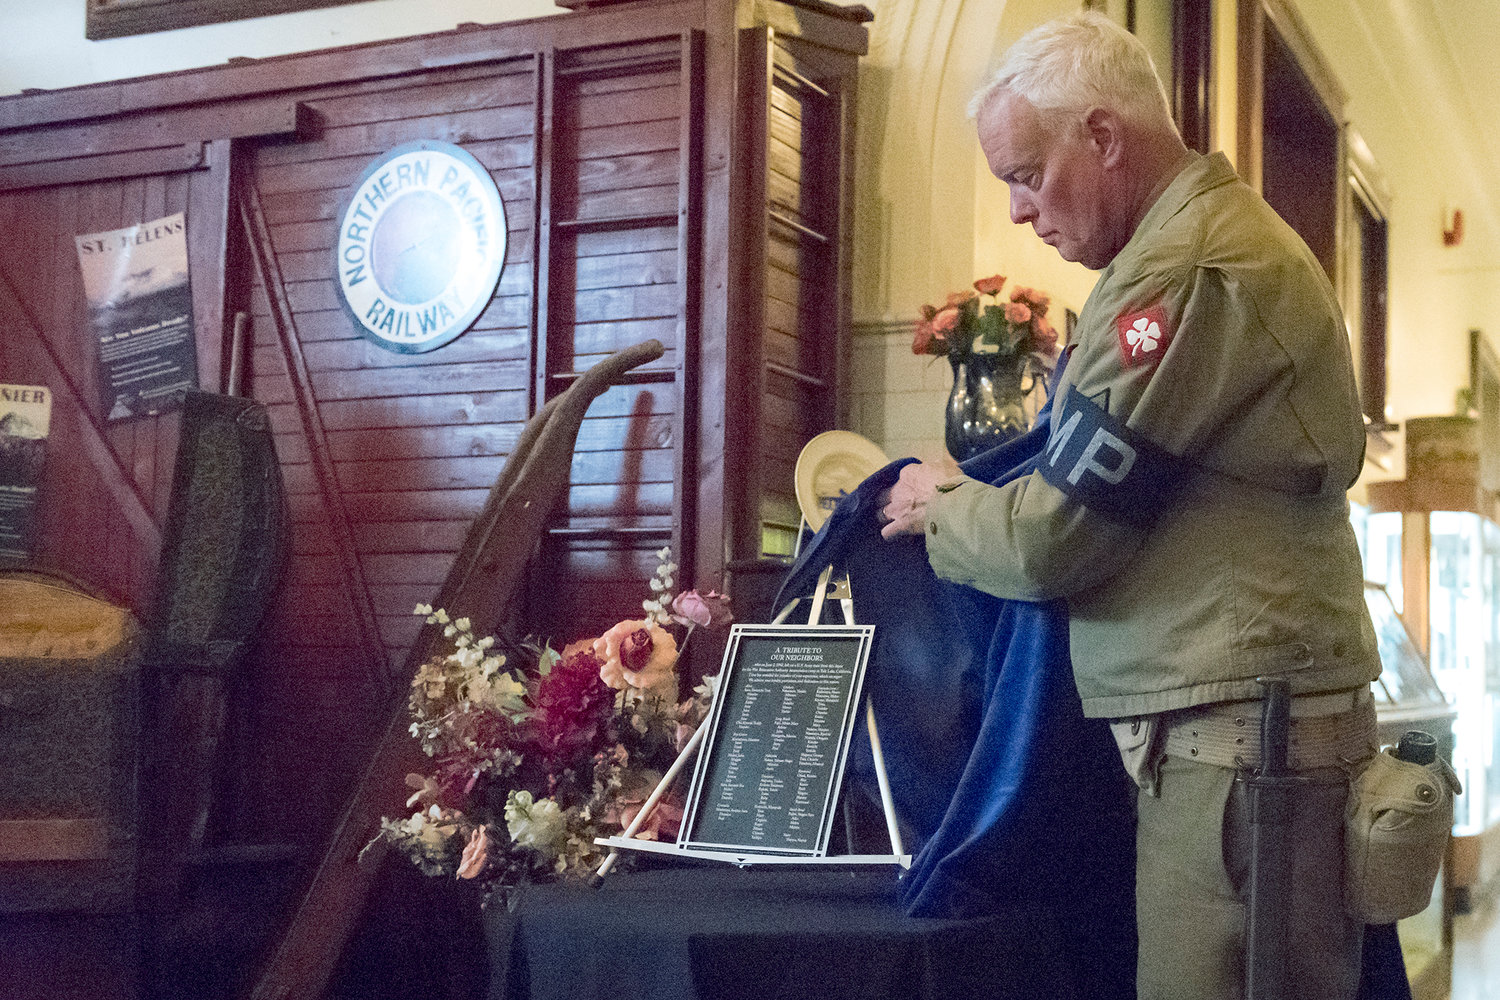 President of the Lewis County Historical Society Peter Lahmann unveils the remembrance plaque dedicated to the Japanese Americans who left Chehalis for Tule Lake California on June 2, 1942. He is dressed in an authentic World War II Army uniform. The patch on his arm is from the 4th Army which was charged with the internment process.